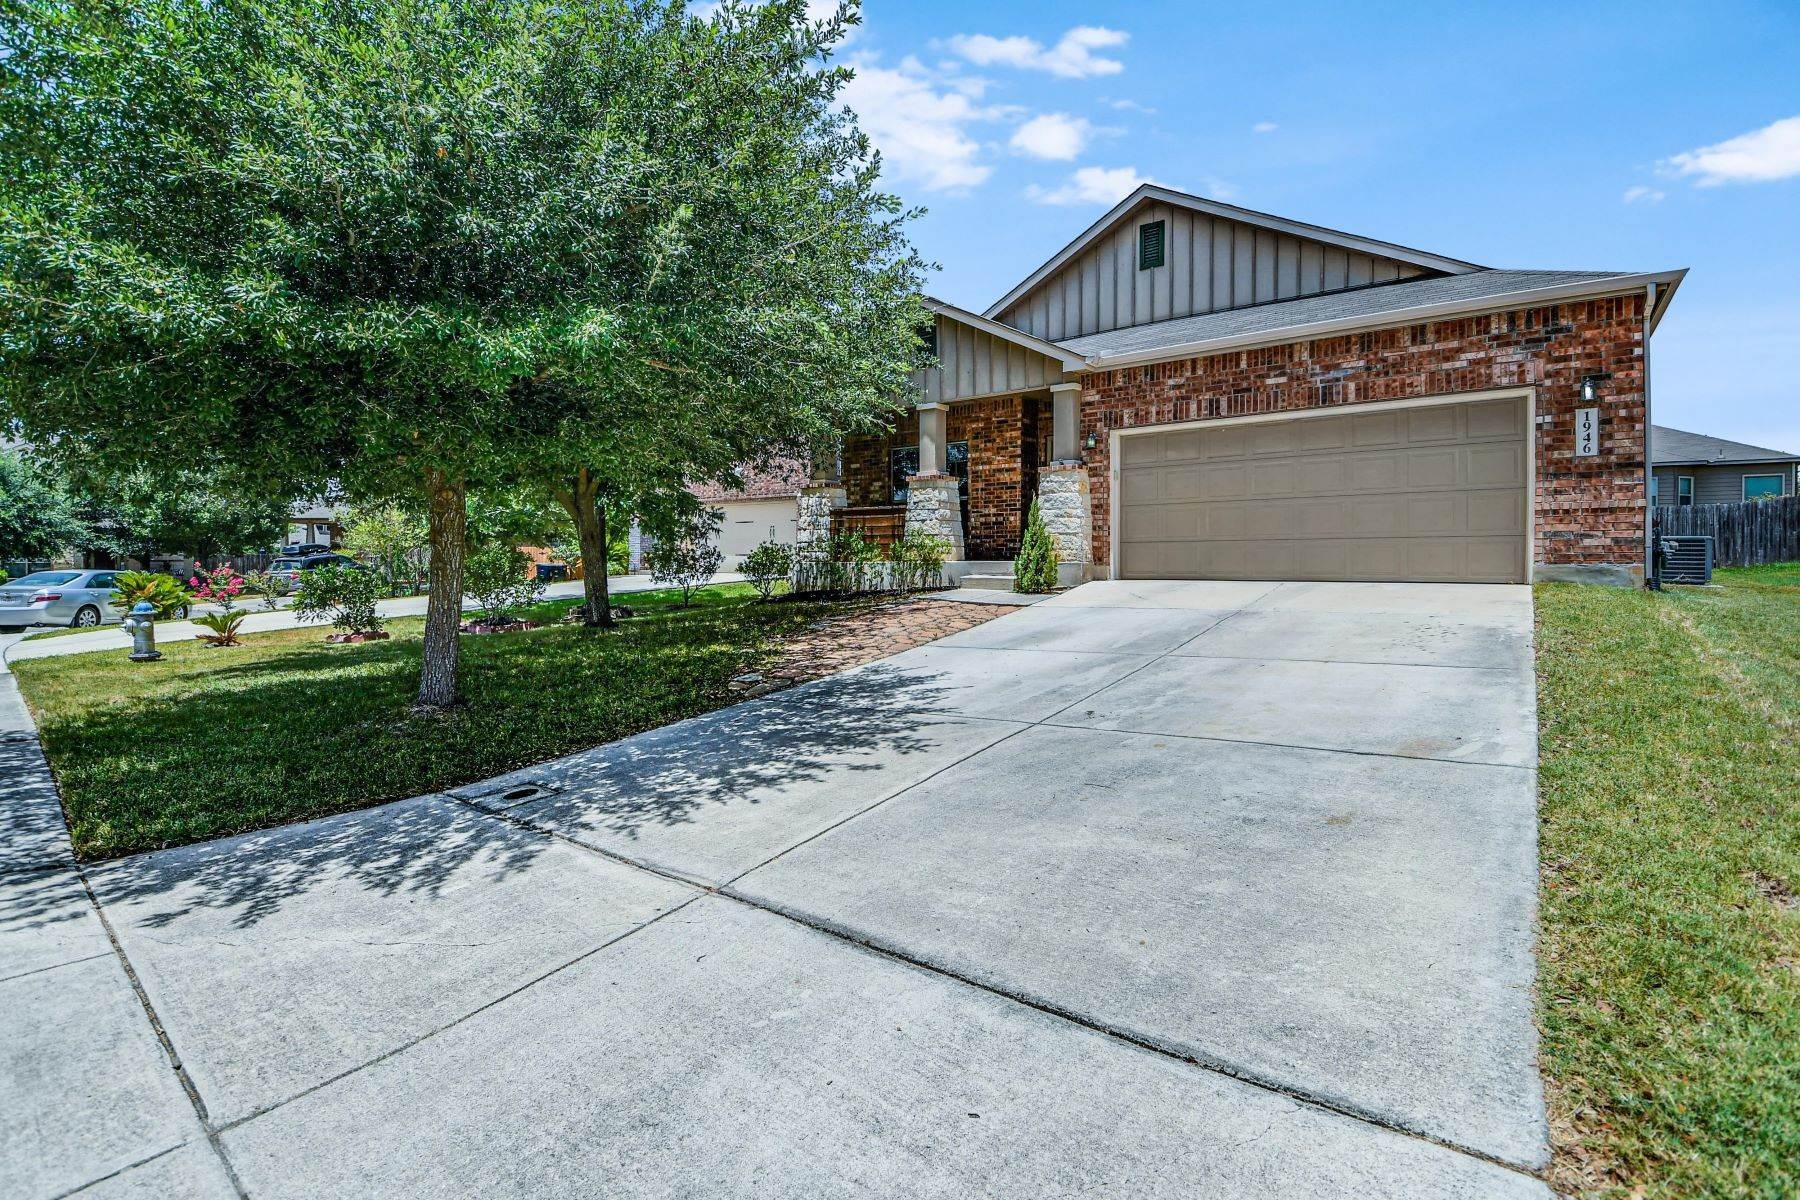 Single Family Homes for Sale at Great Home in Convenient Location 1946 Spotted Owl New Braunfels, Texas 78130 United States